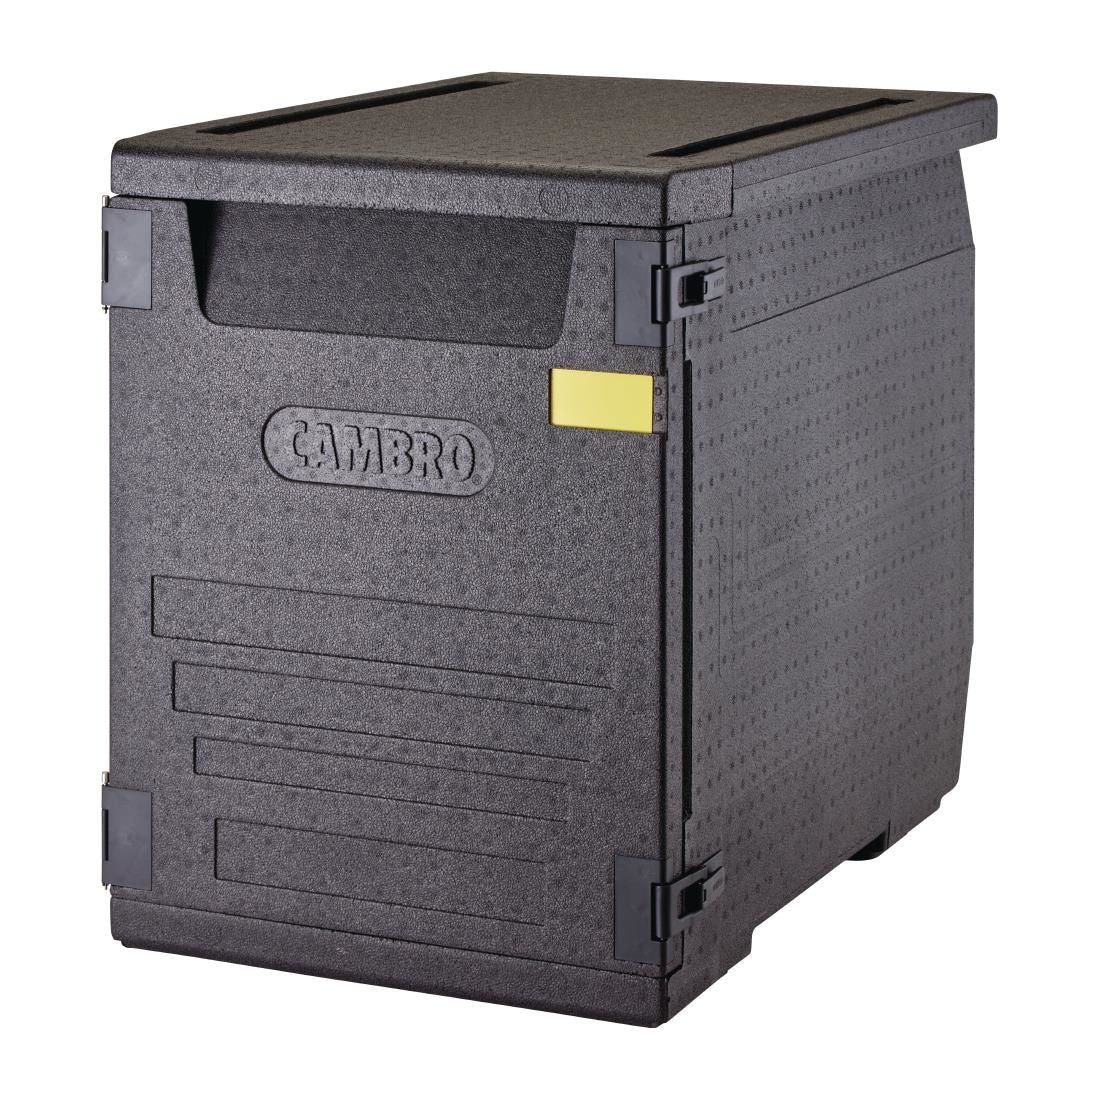 Cambro Insulated Front Loading Food Pan Carrier 155 Litre JD Catering Equipment Solutions Ltd